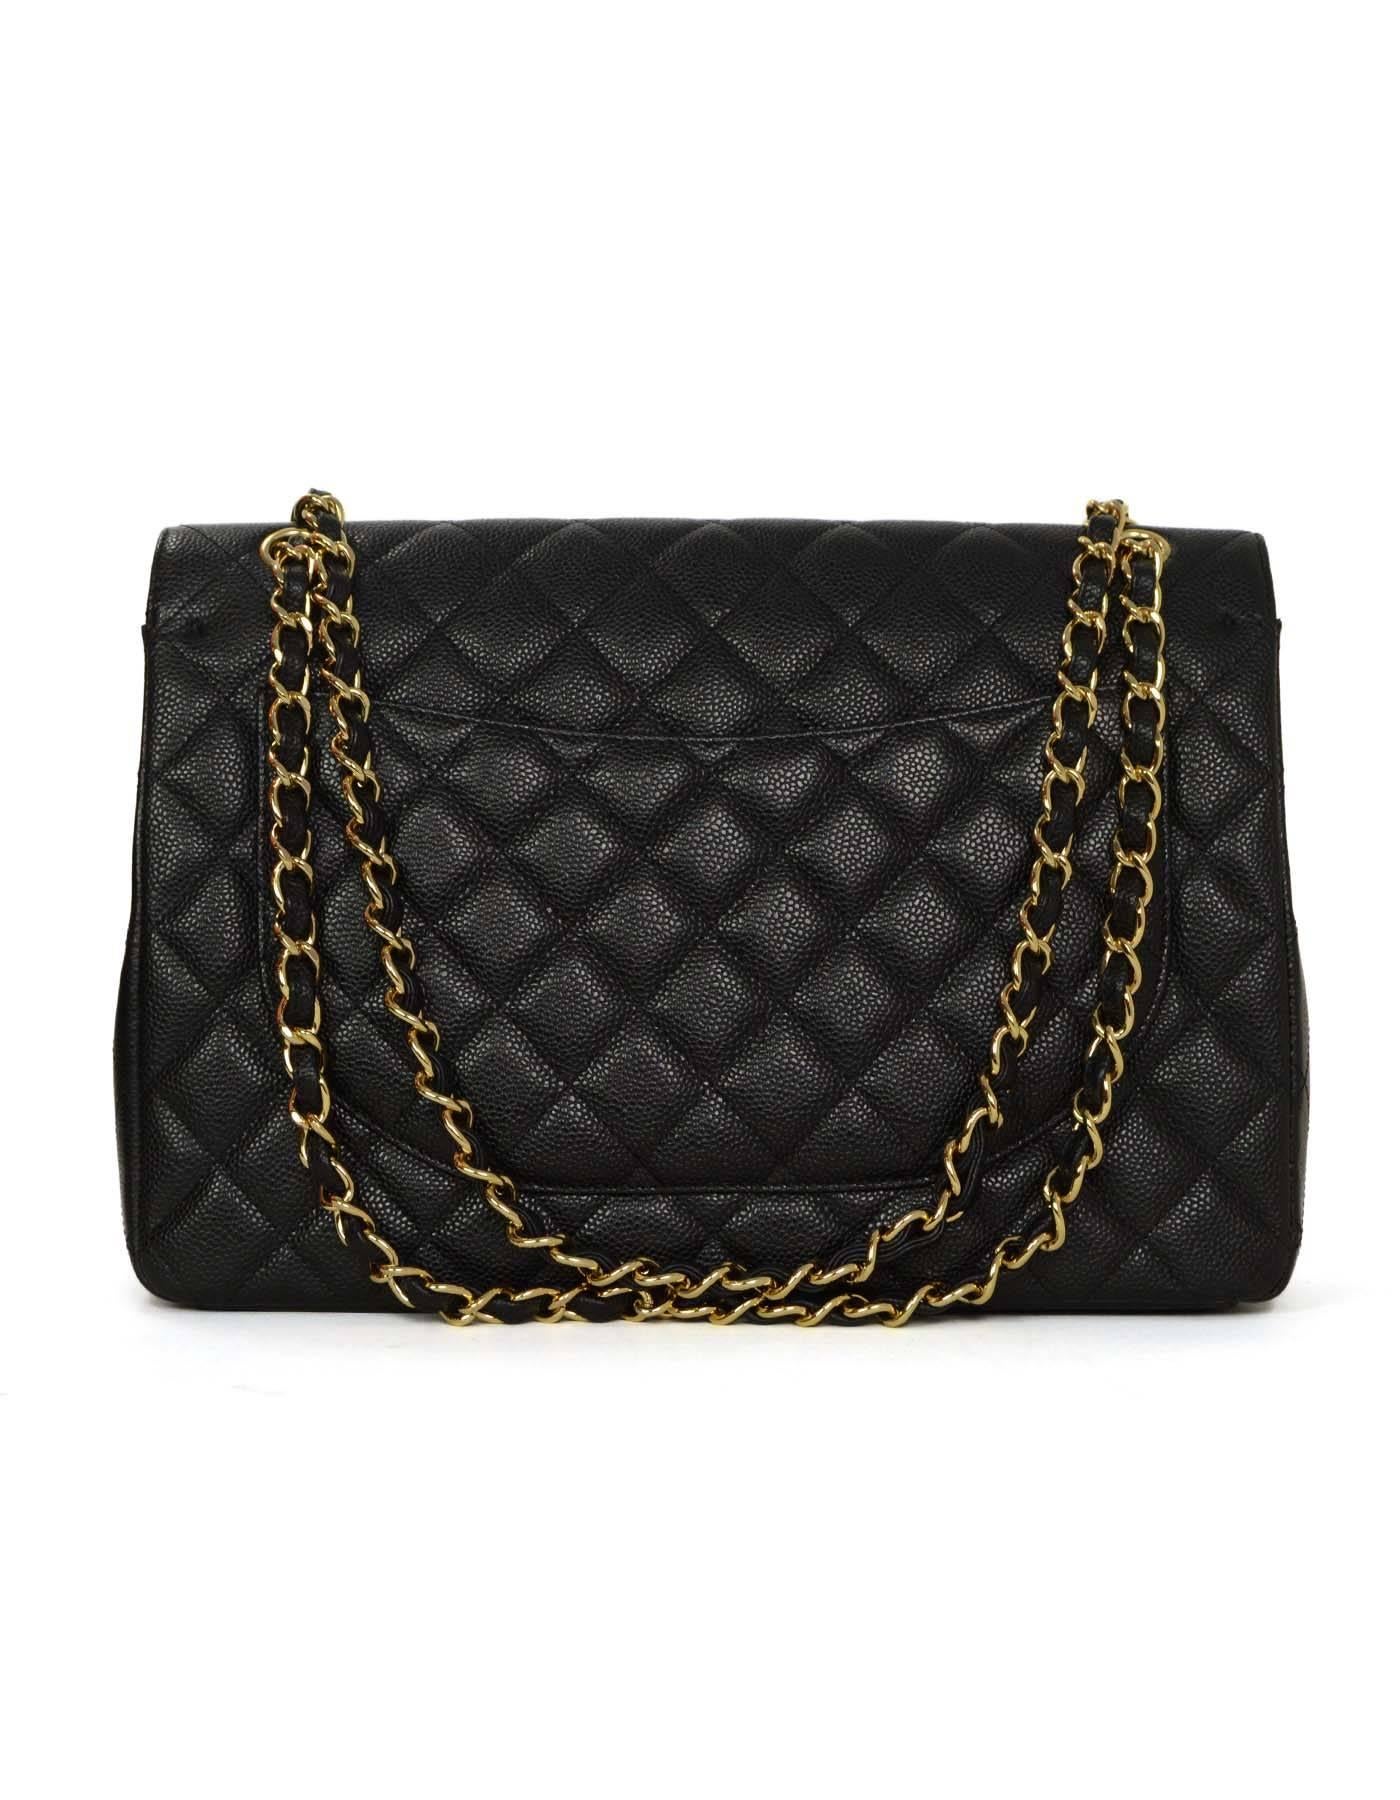 Chanel Black Classic Maxi Double Flap Bag
Features adjustable shoulder strap
Made in: Italy
Year of Production: 2011
Color: Black
Hardware: Goldtone
Materials: Caviar leather
Lining: Black and burgundy leather
Closure/opening: Double flap